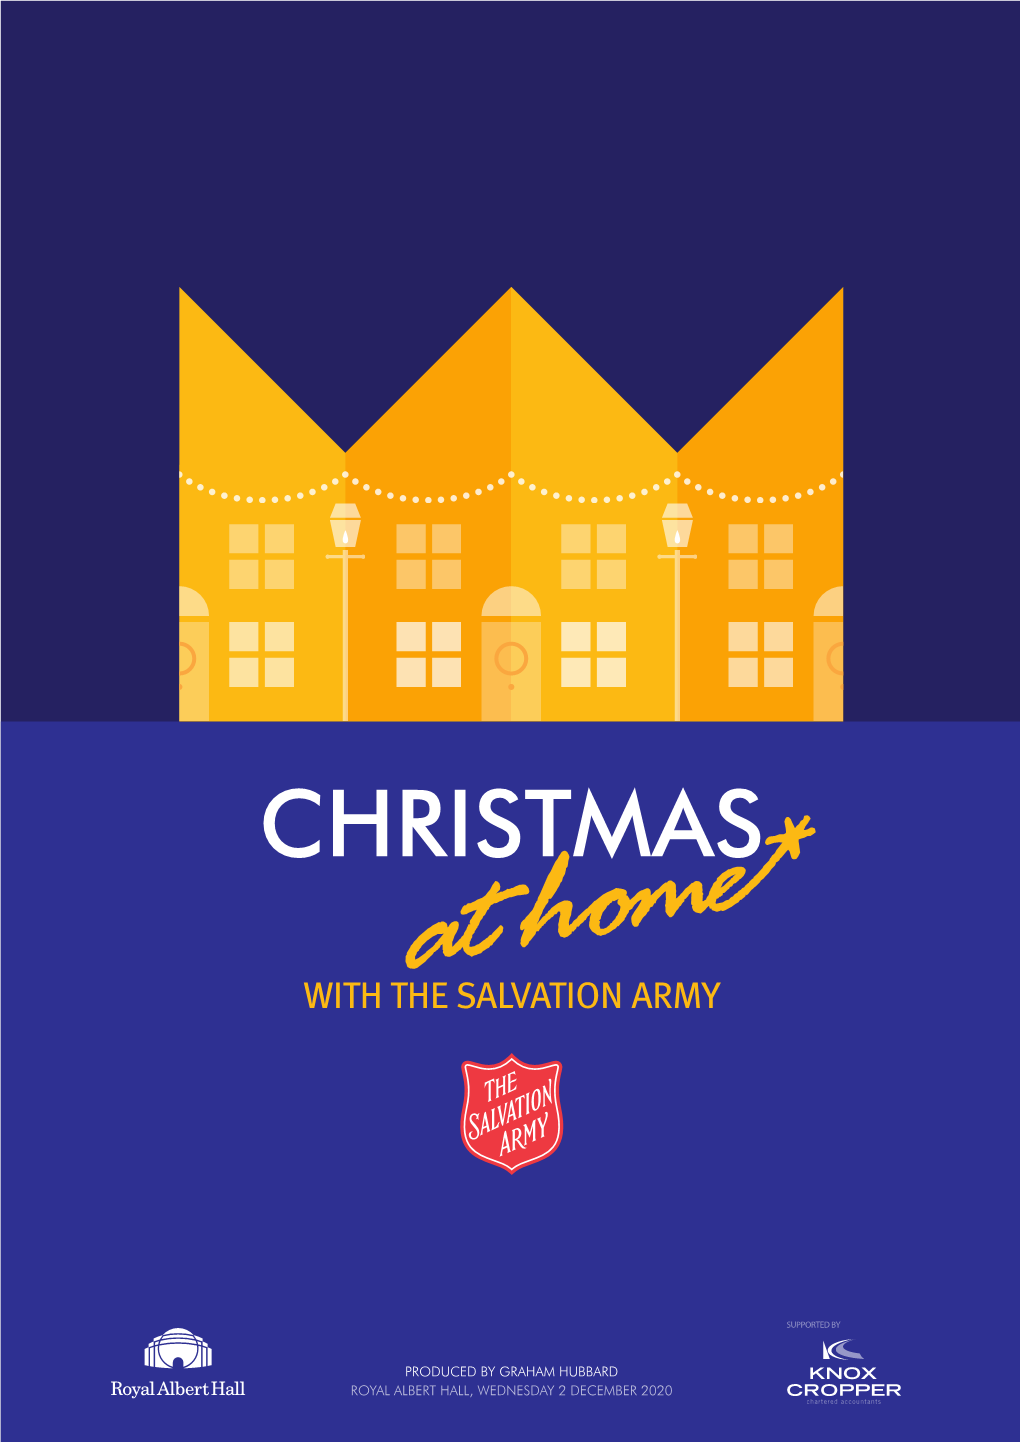 And Help the Salvation Army to Spread Joy at Christmas By: Distributing Toys to Children Whose Parents Are Too Hard up to Afford Presents at Christmas